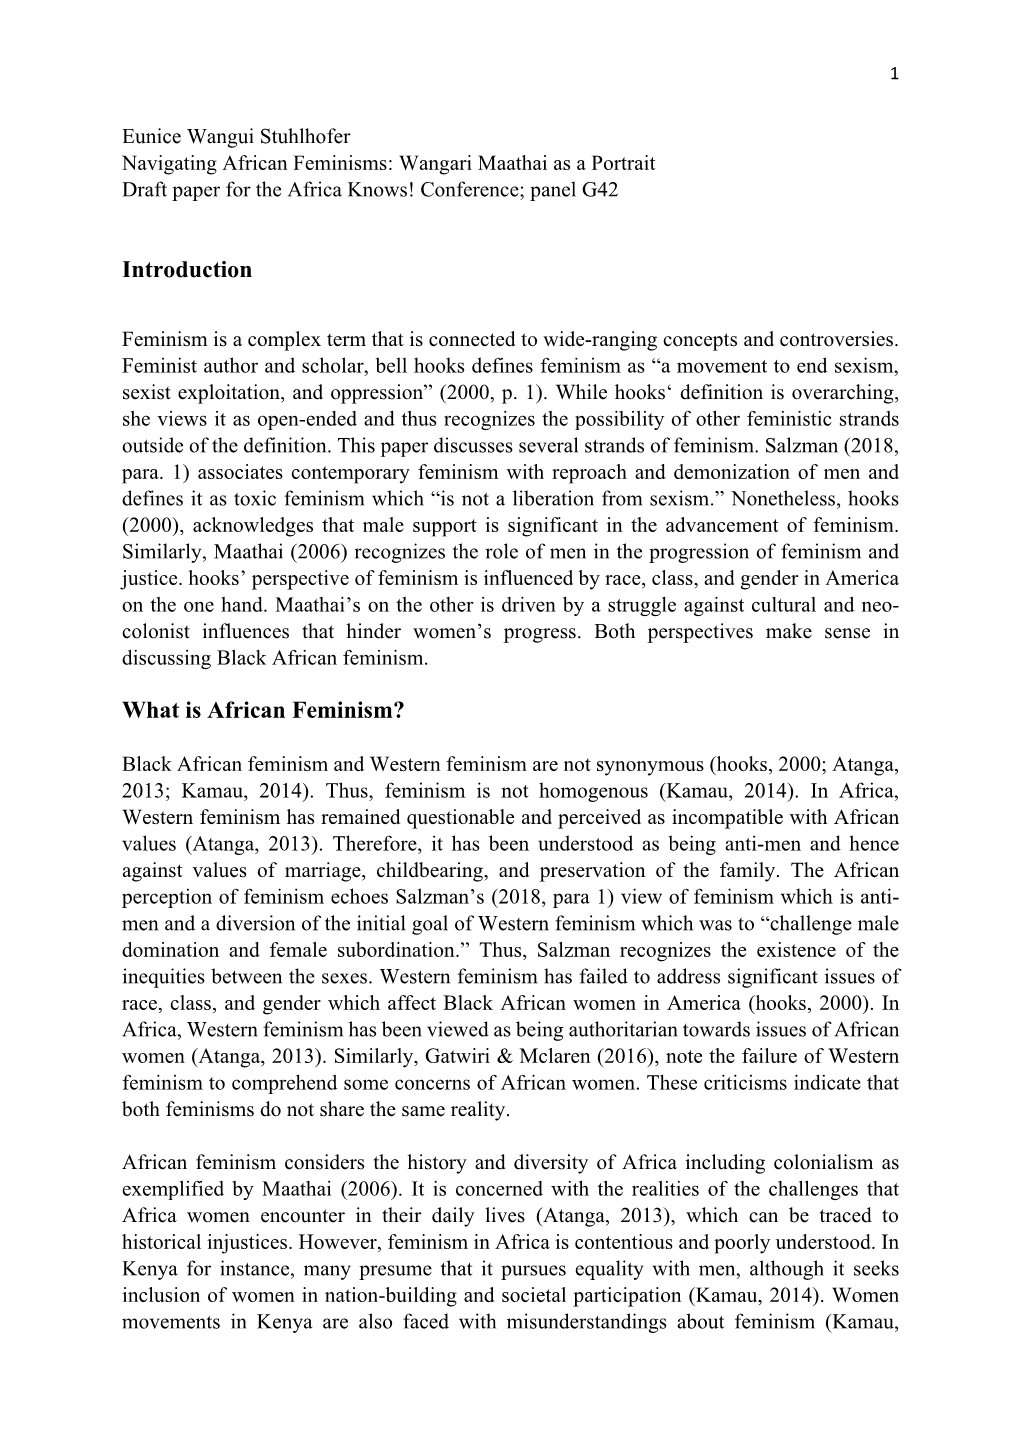 Introduction What Is African Feminism?